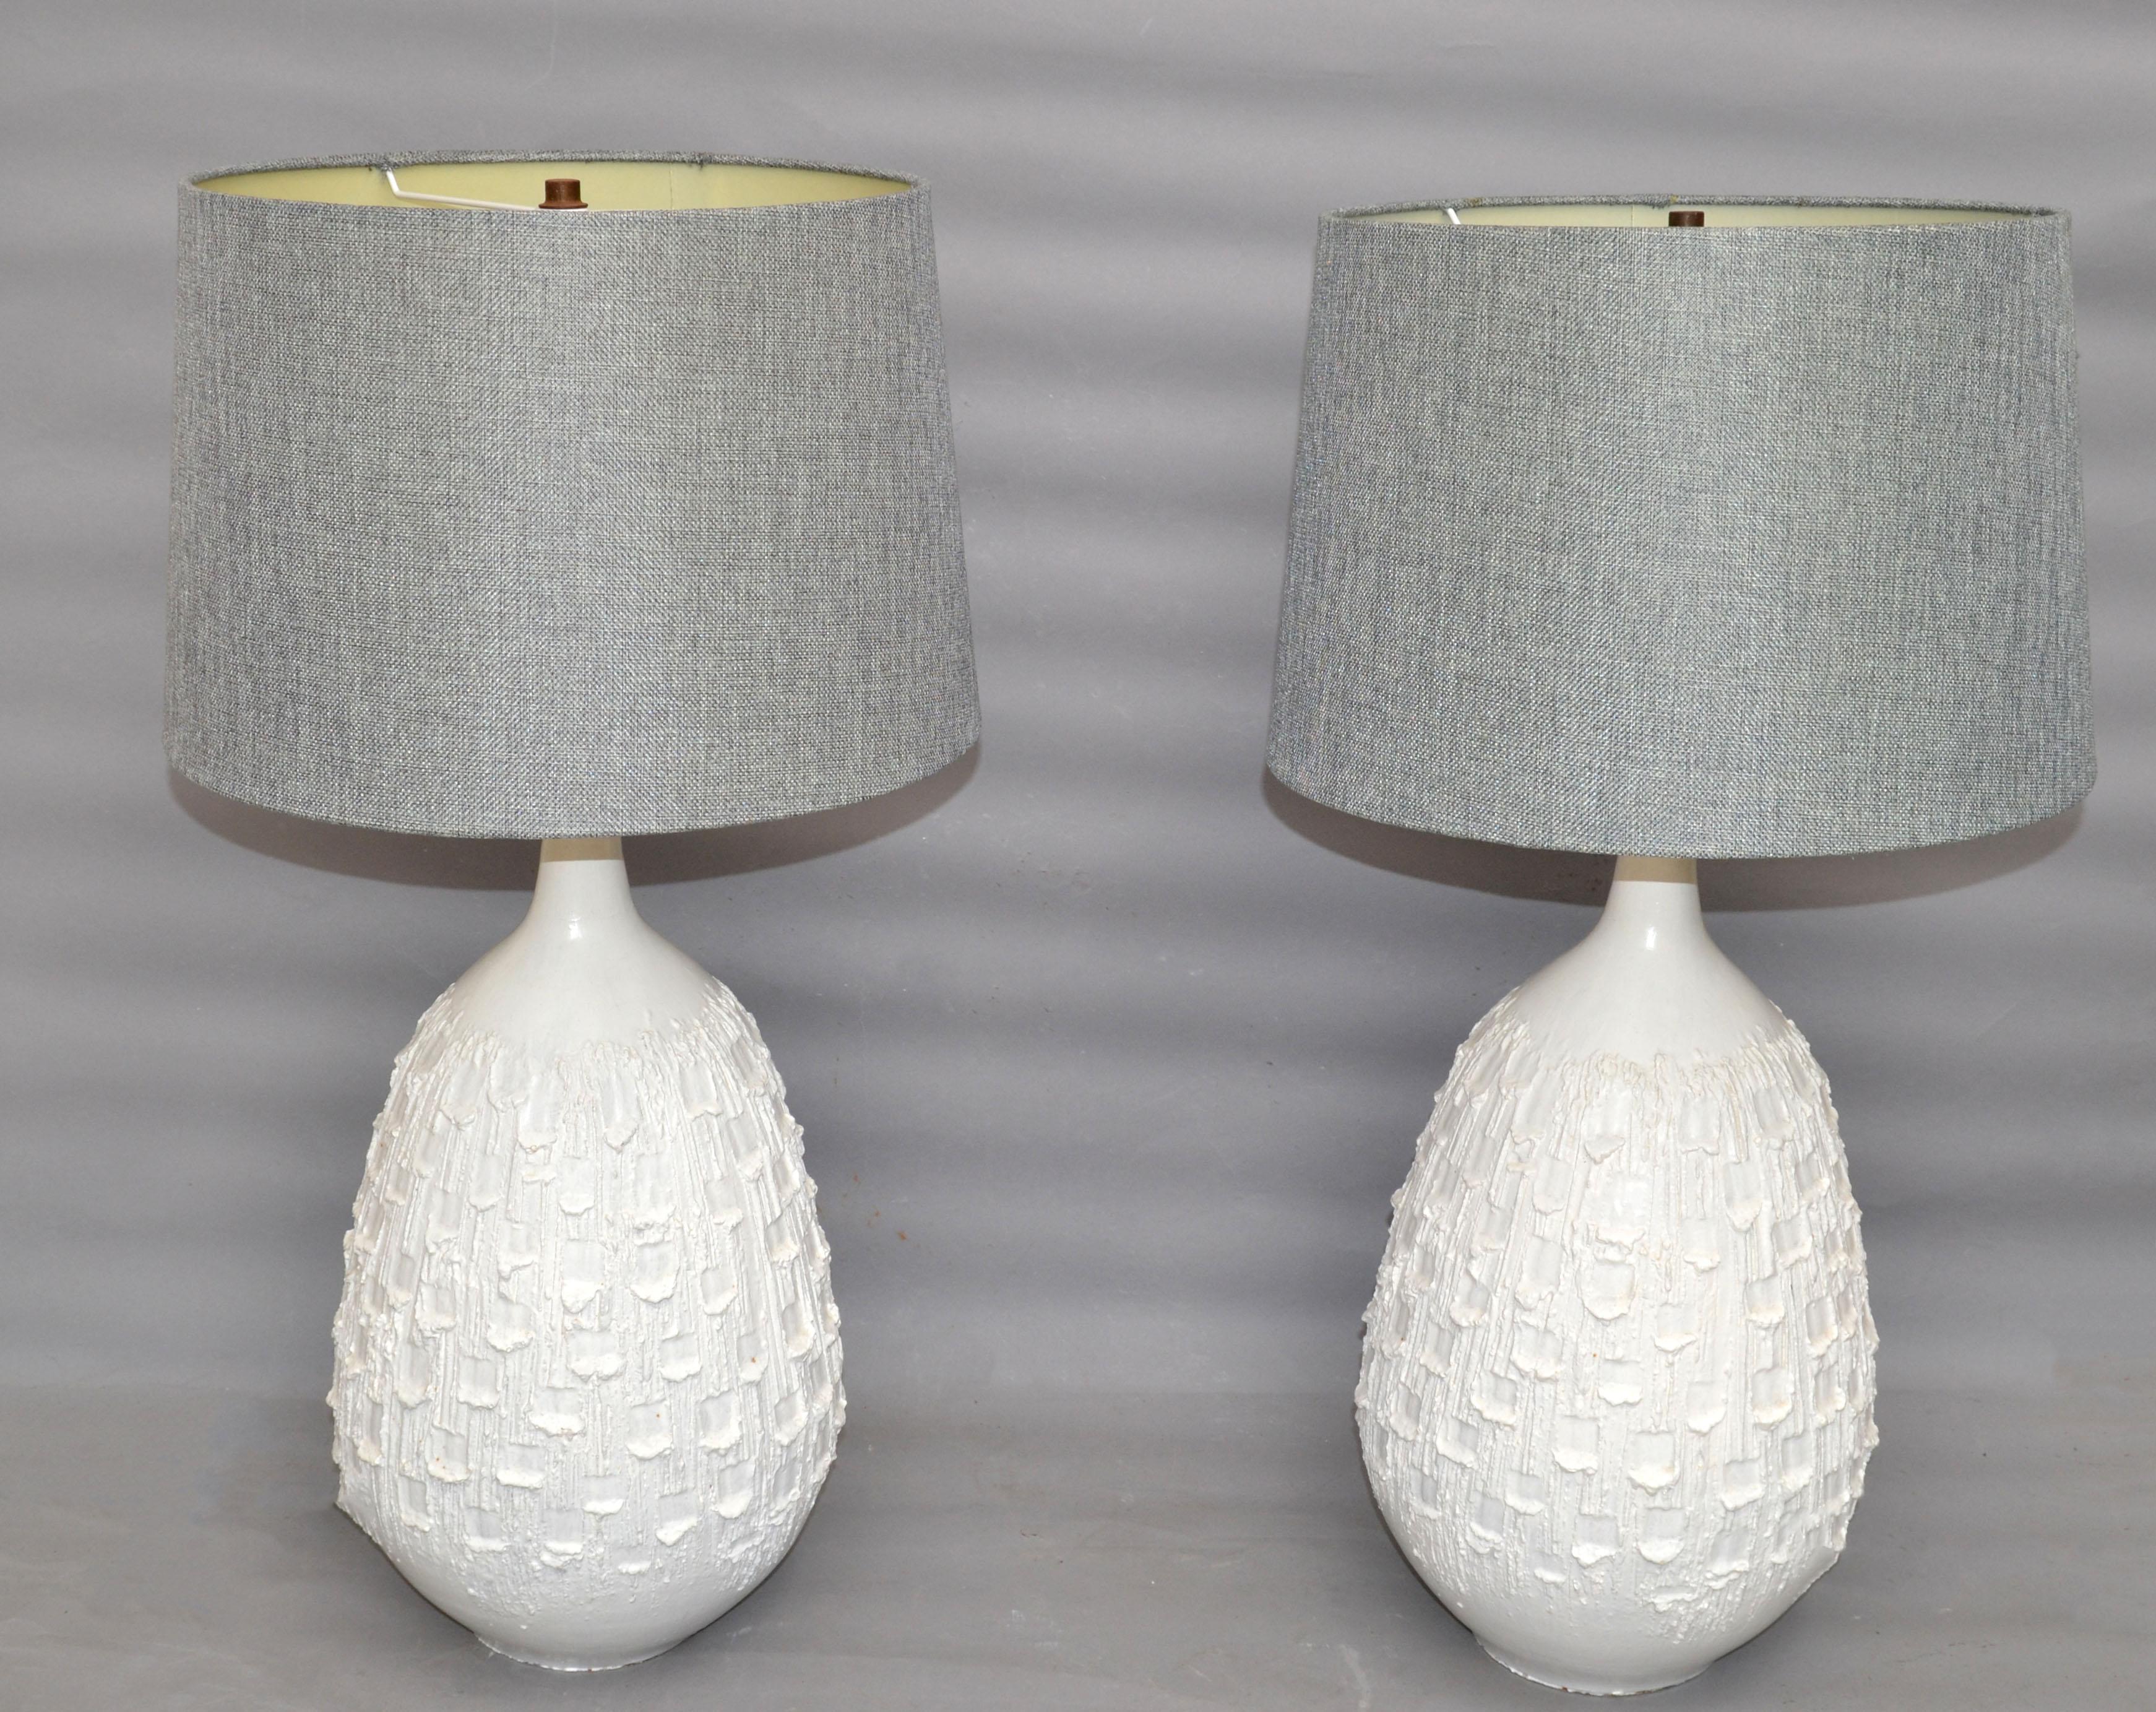 Pair of Mid-Century Modern White Ceramic Table Lamps For Sale 2